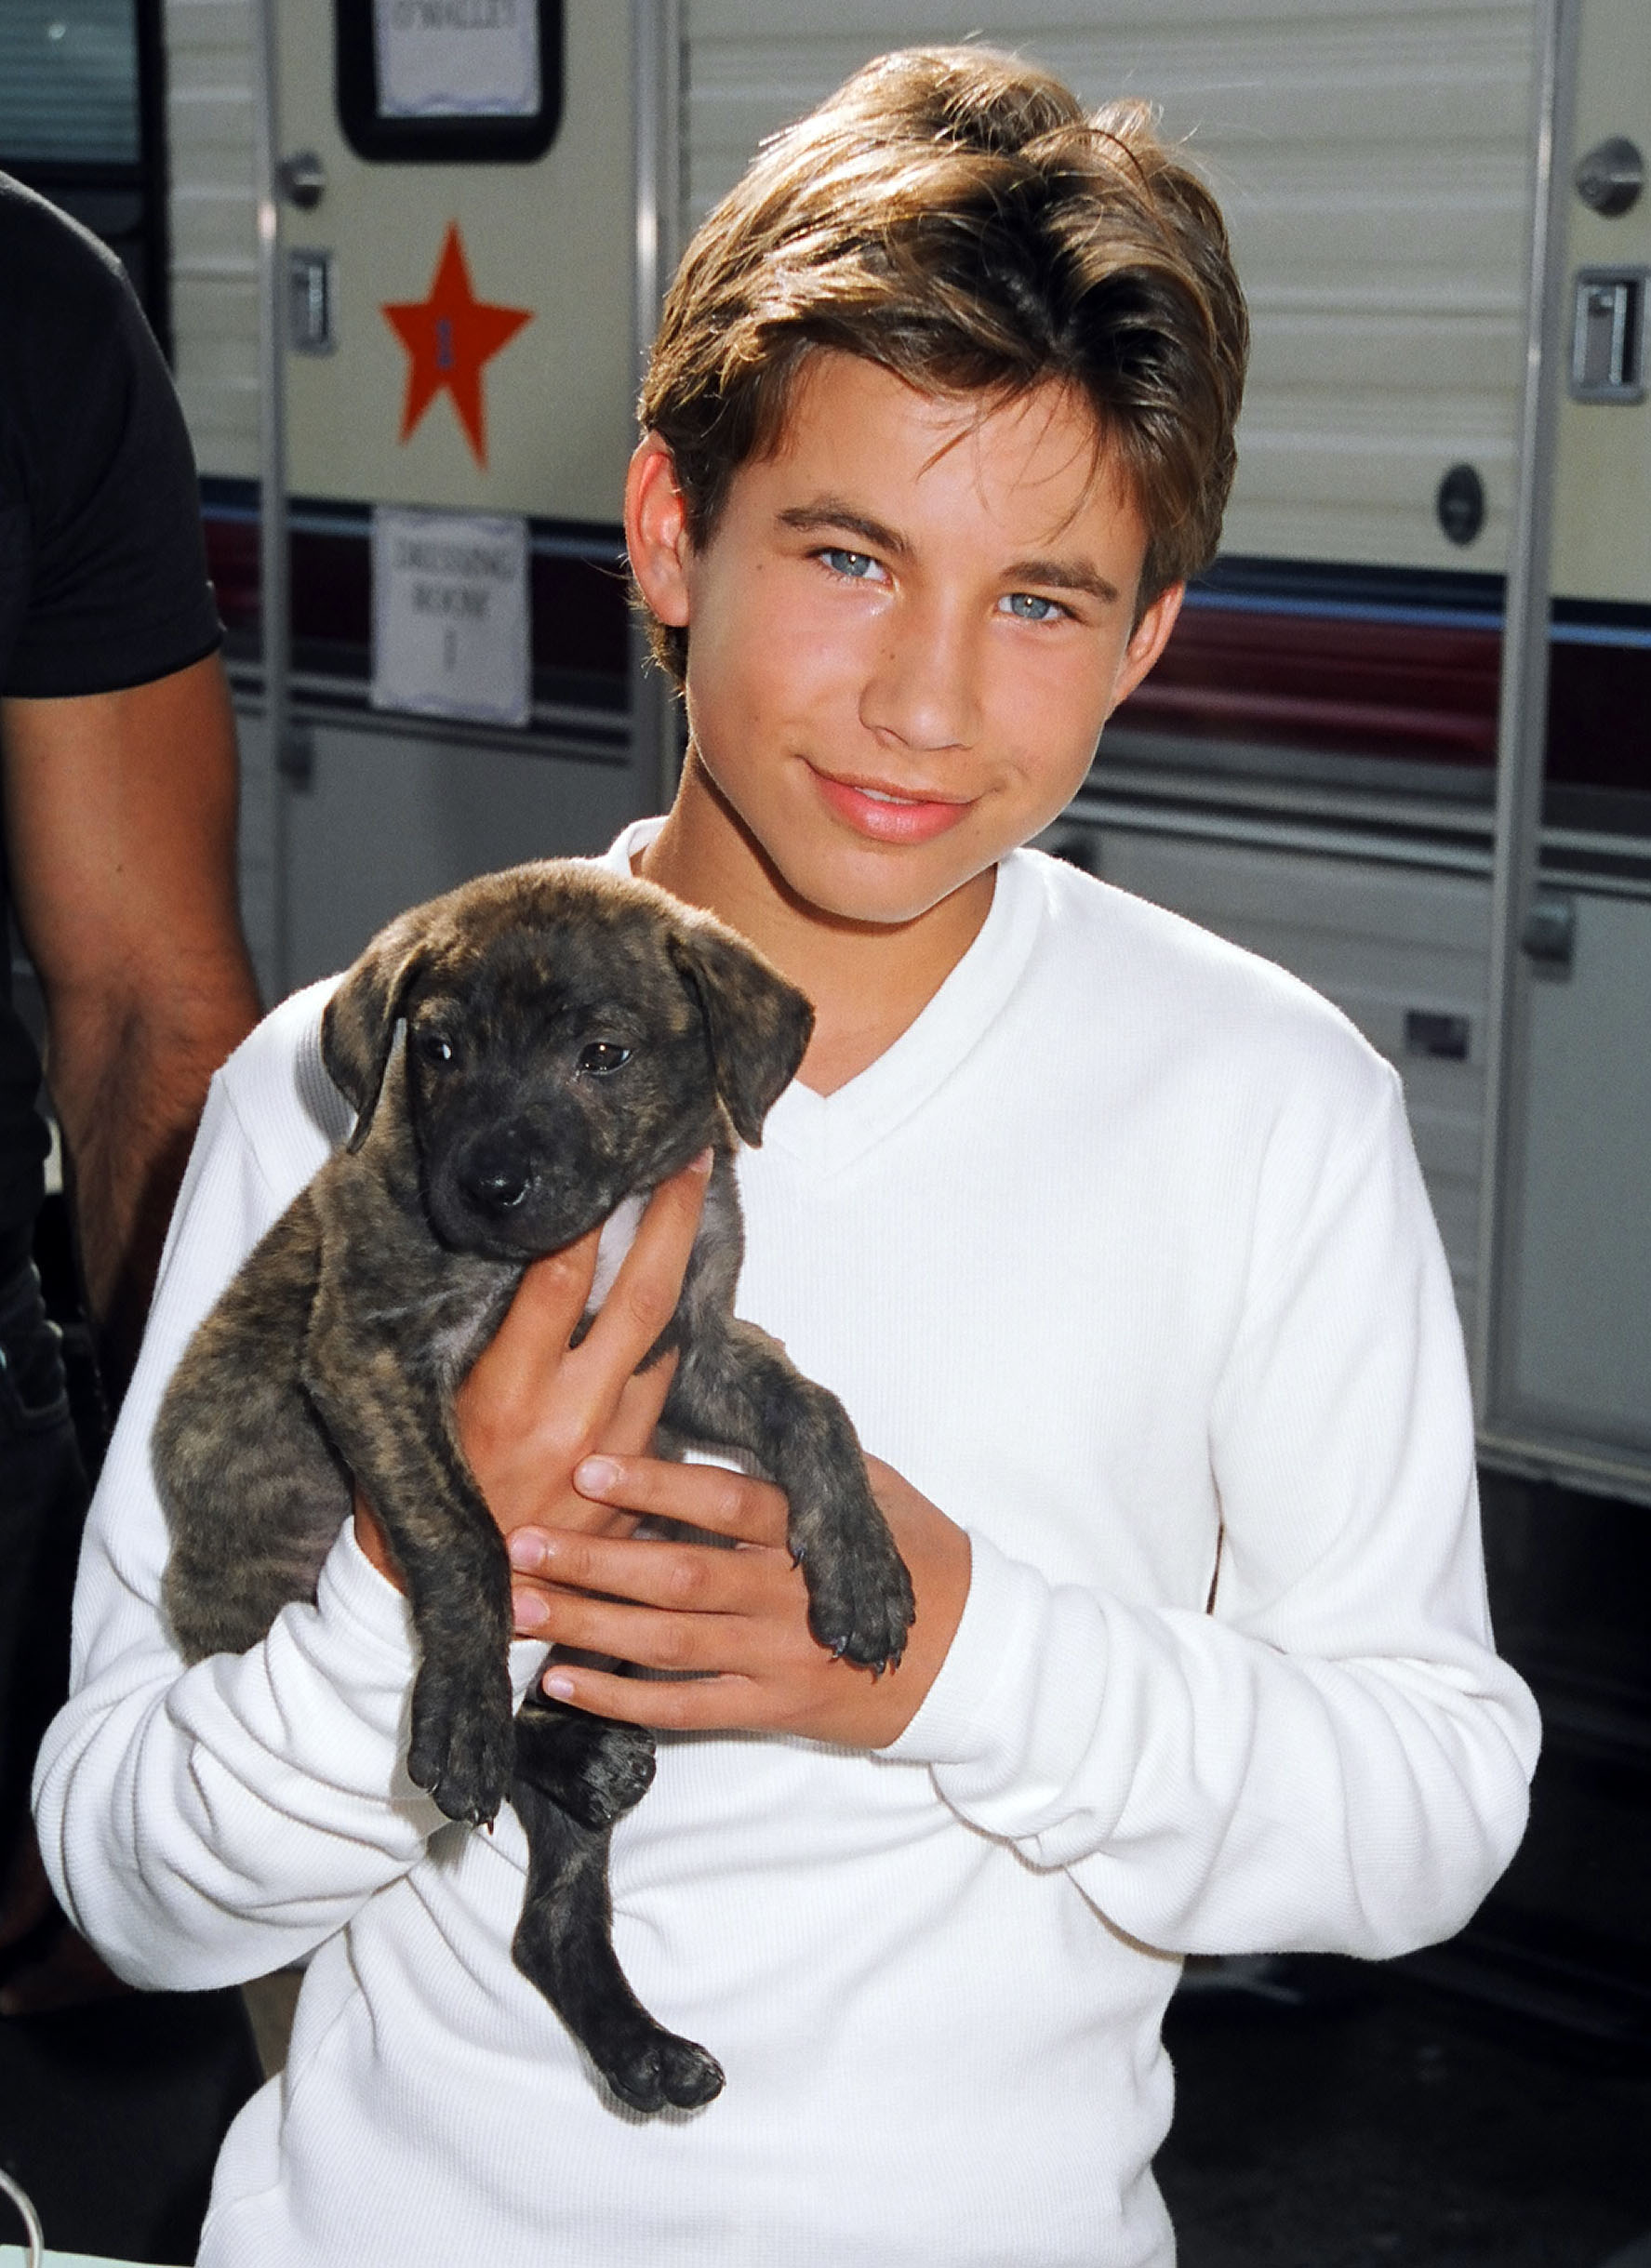 Jonathan Taylor Thomas at the 1996 Nickelodeon Big Help event | Source: Getty Images